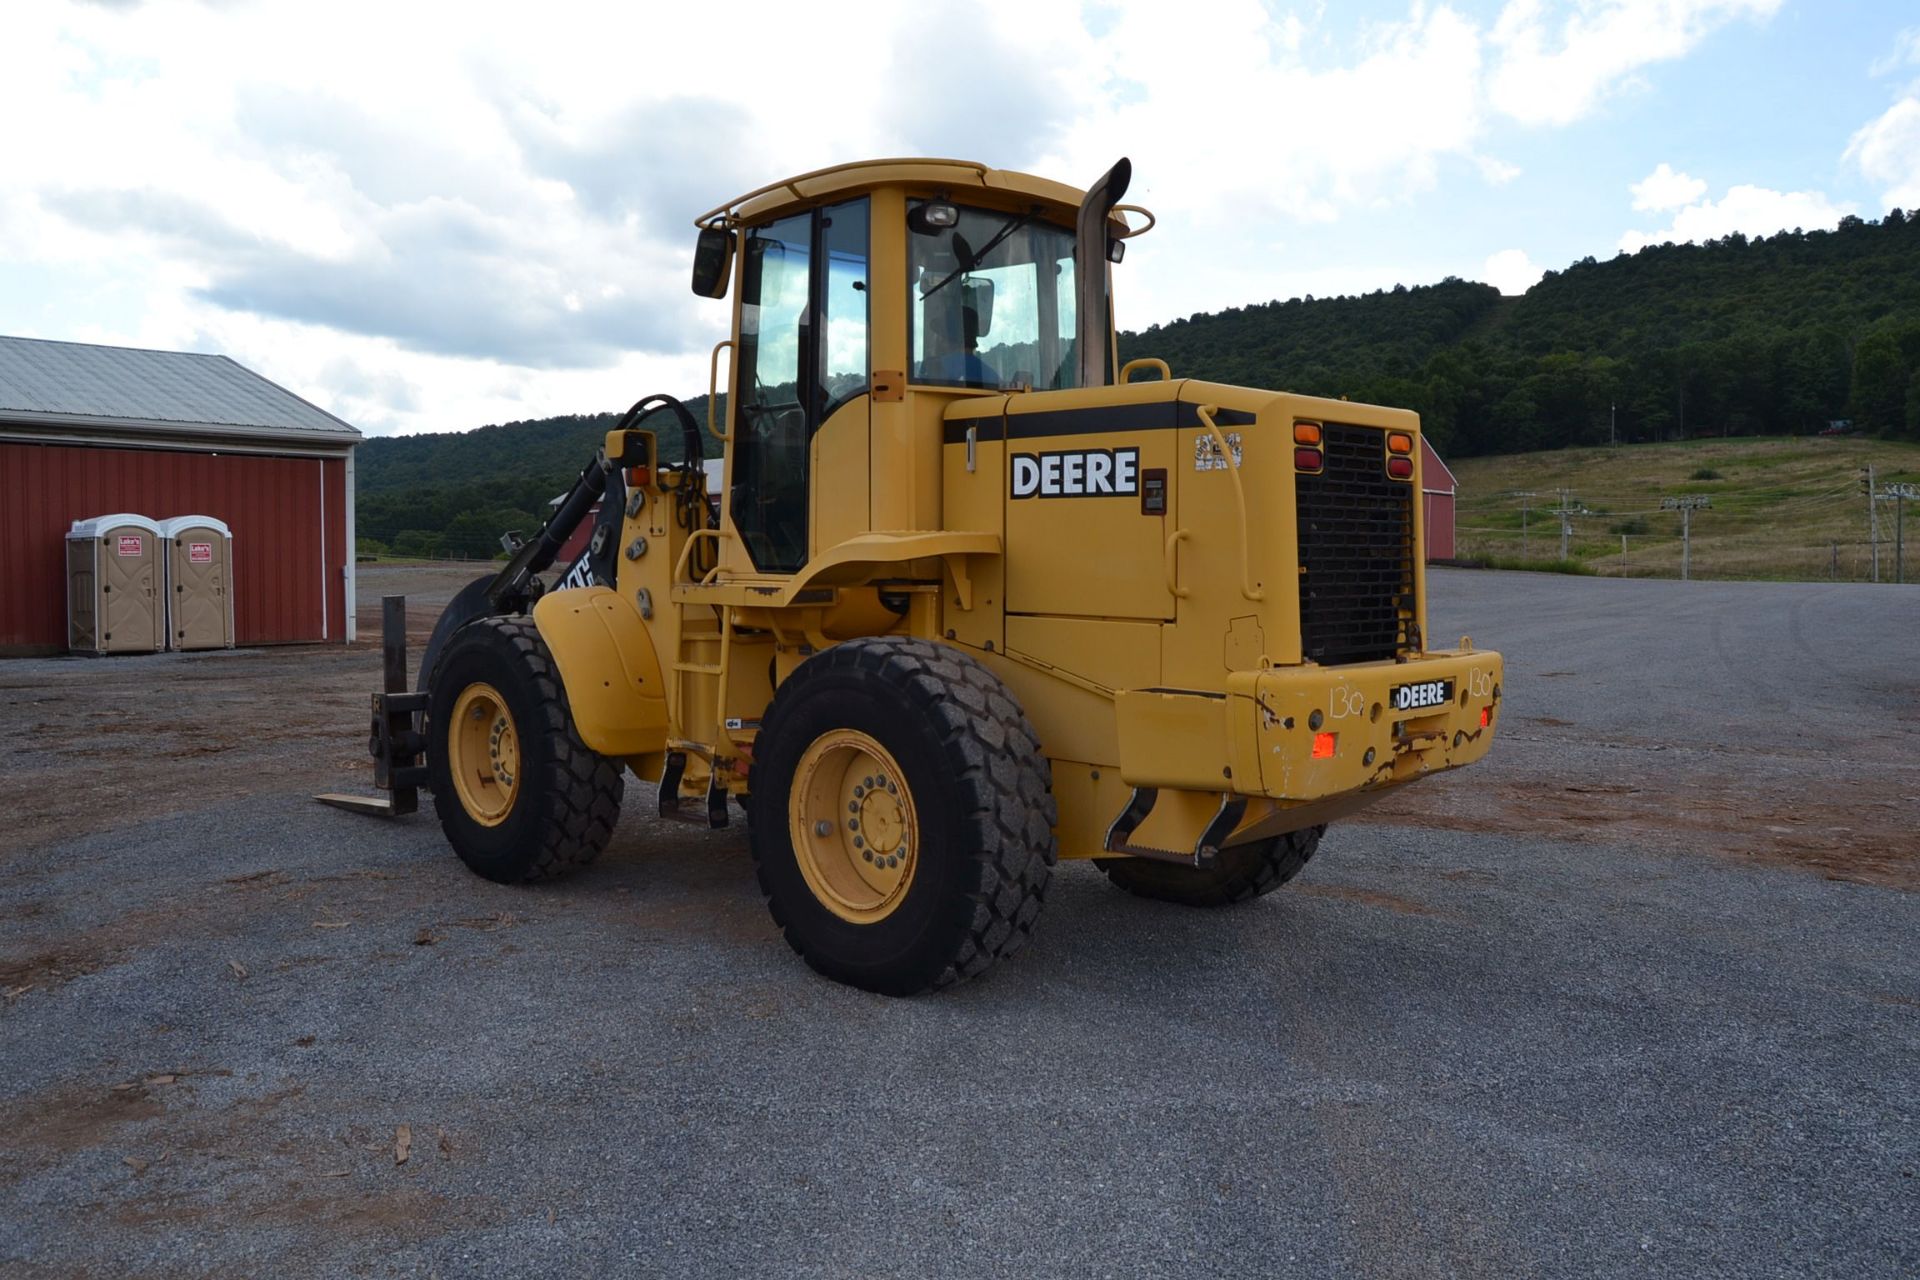 JOHN DEERE TC44H ARTICULATING WHEEL LOADER W/ FORKS W/ SINGLE HOLD DOWN W/ ENCLOSED CAB W/ 17.5Z25 - Image 2 of 4